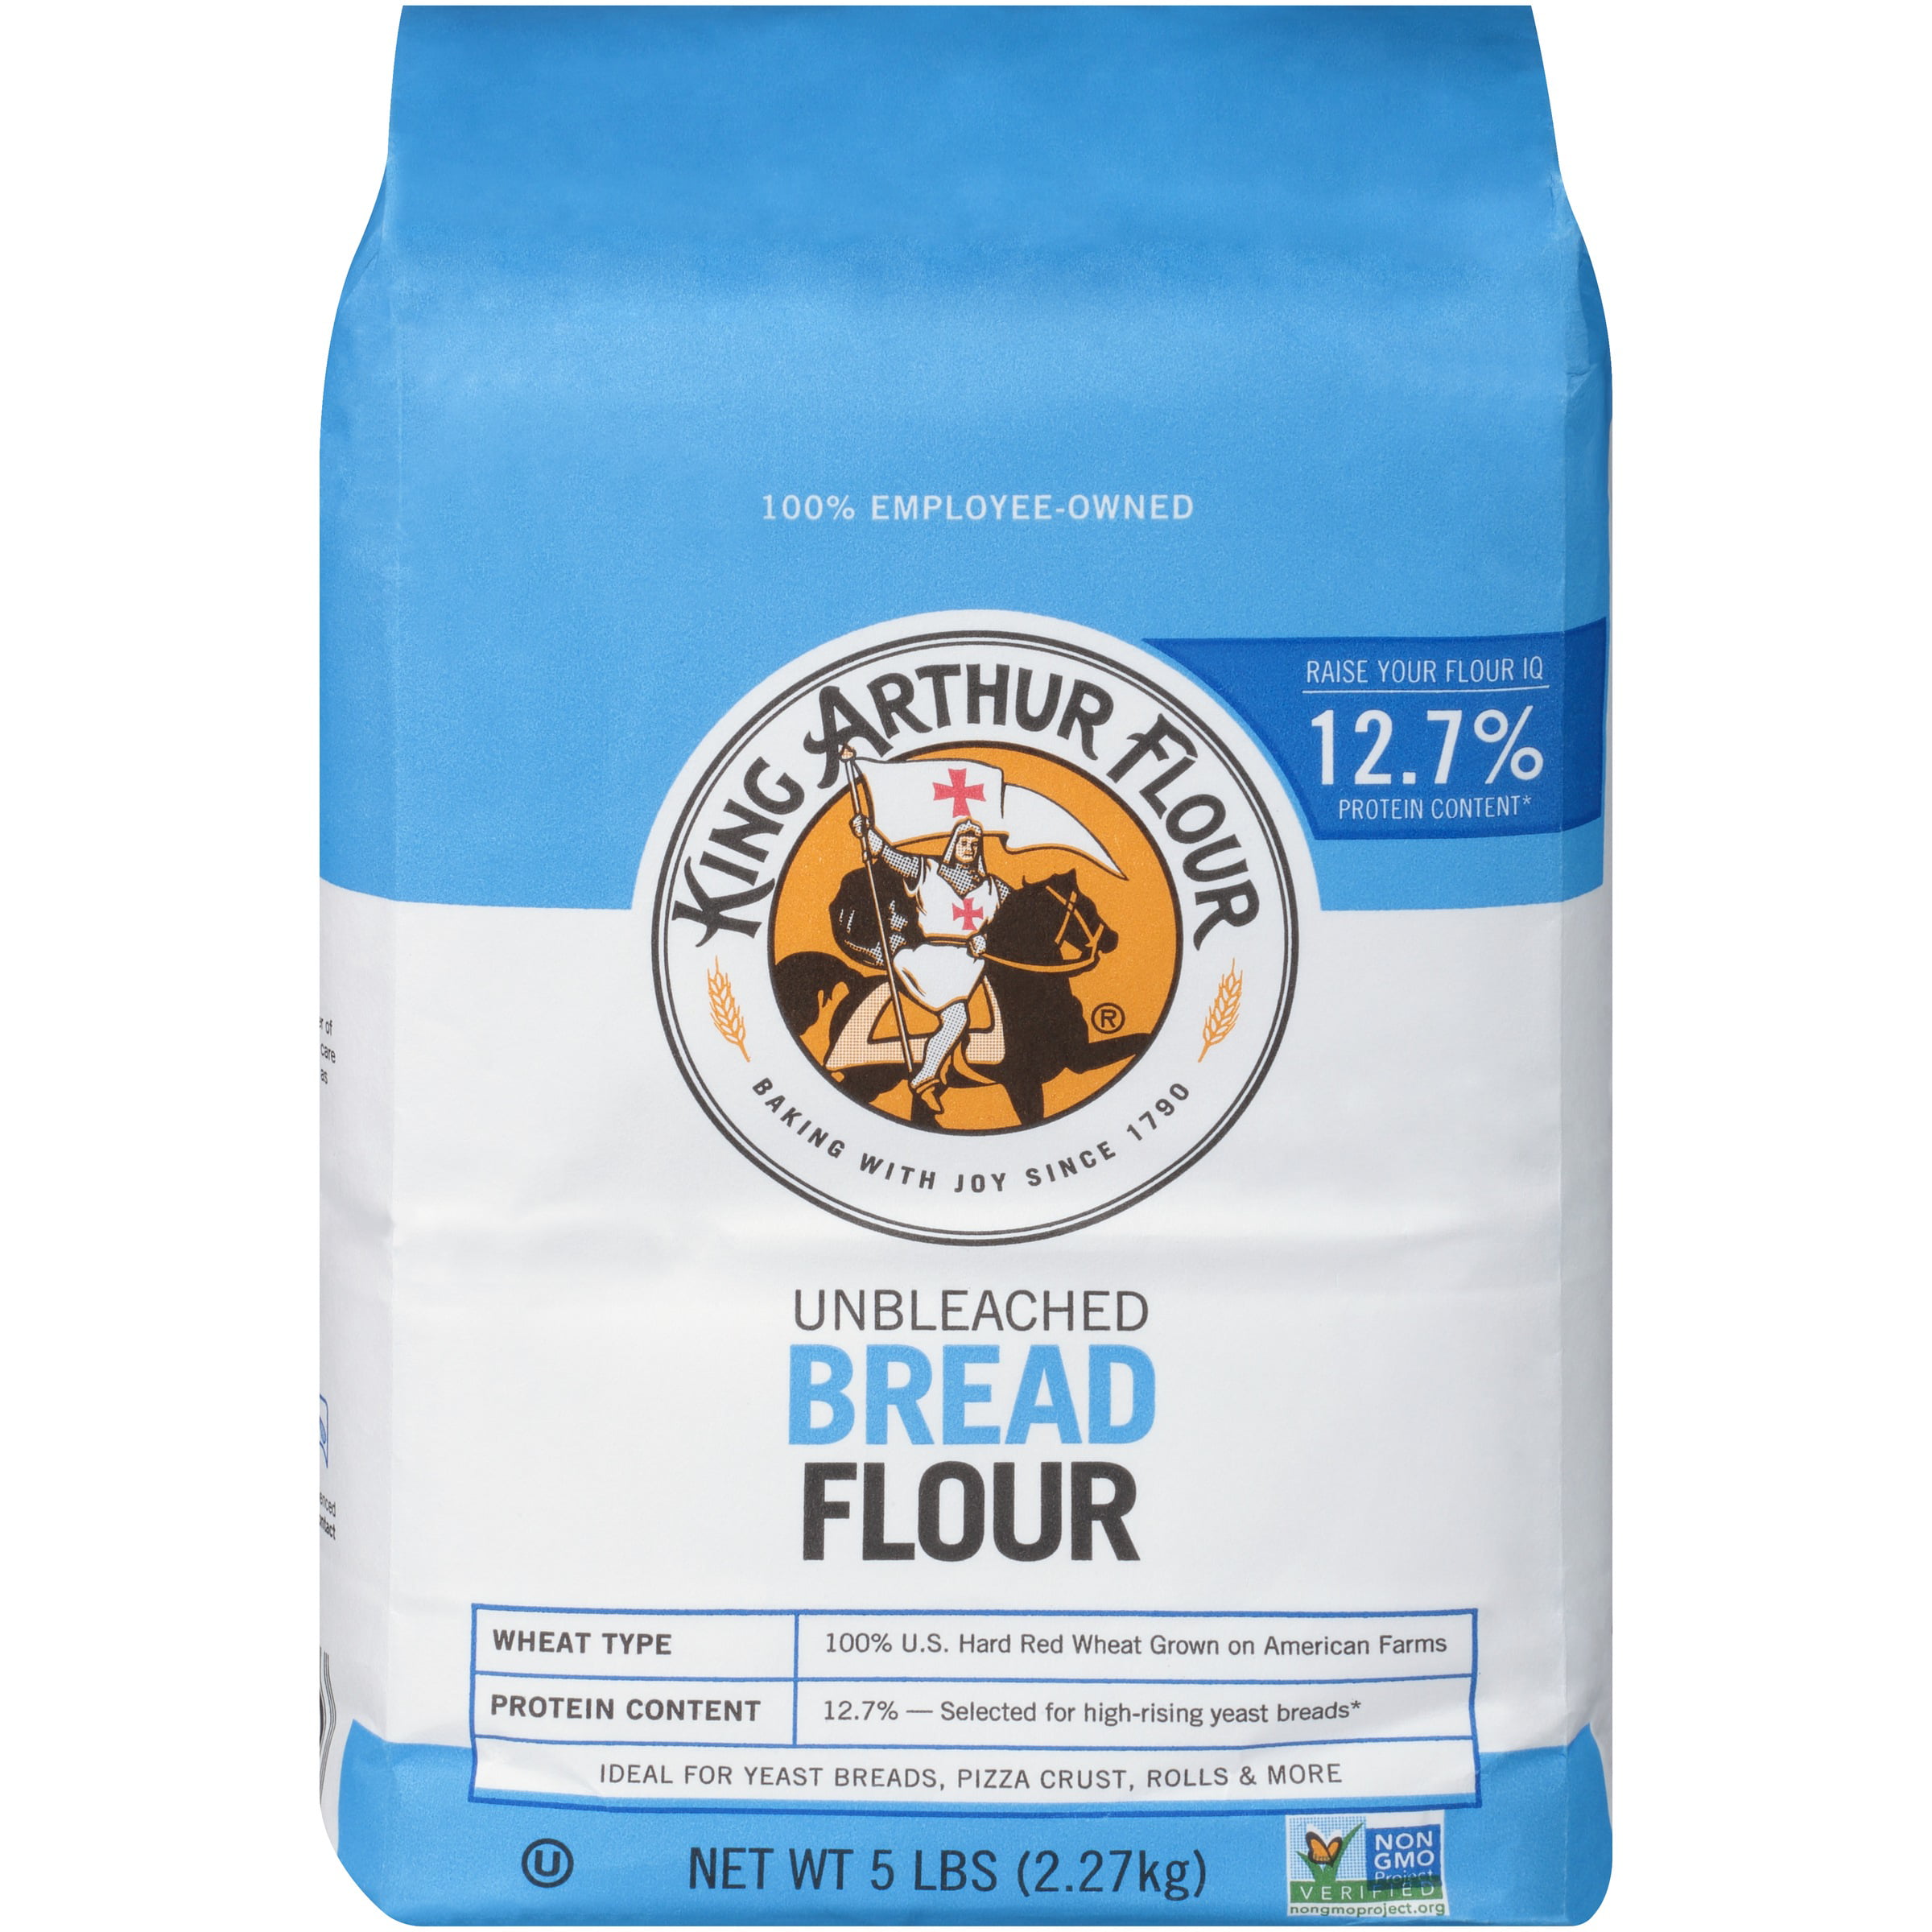 Unbleached Bread Flour at Best Price in Kota Kinabalu, Sabah Poultry